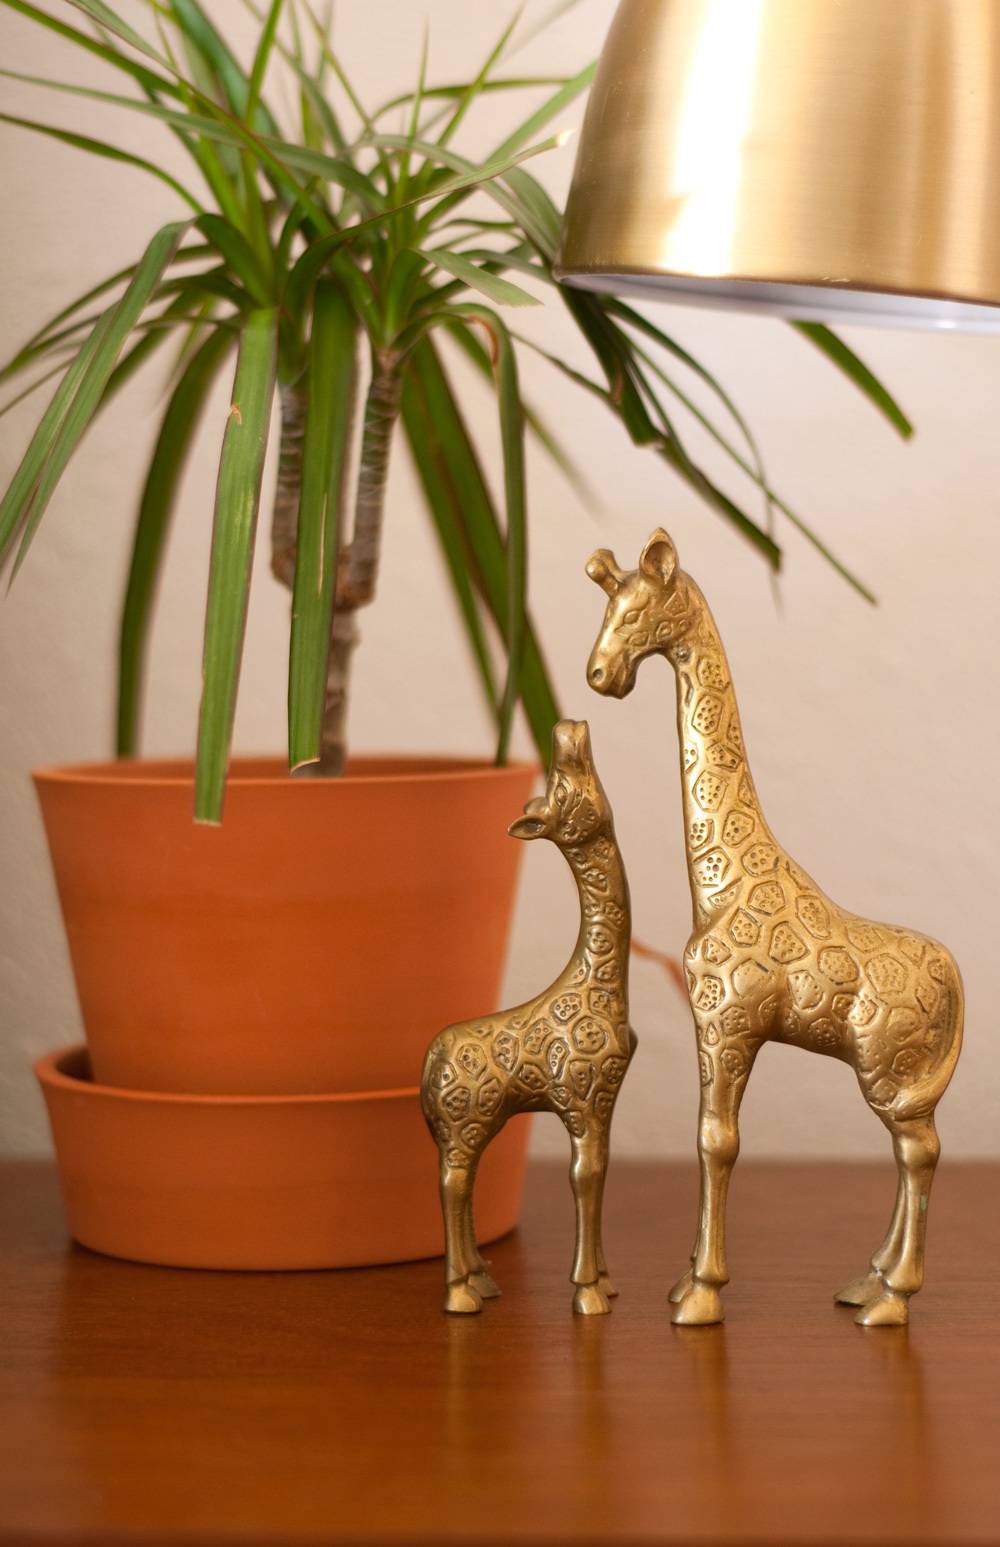 Two golden giraffe statues sit next to a potted plant on a wooden piece of furniture.